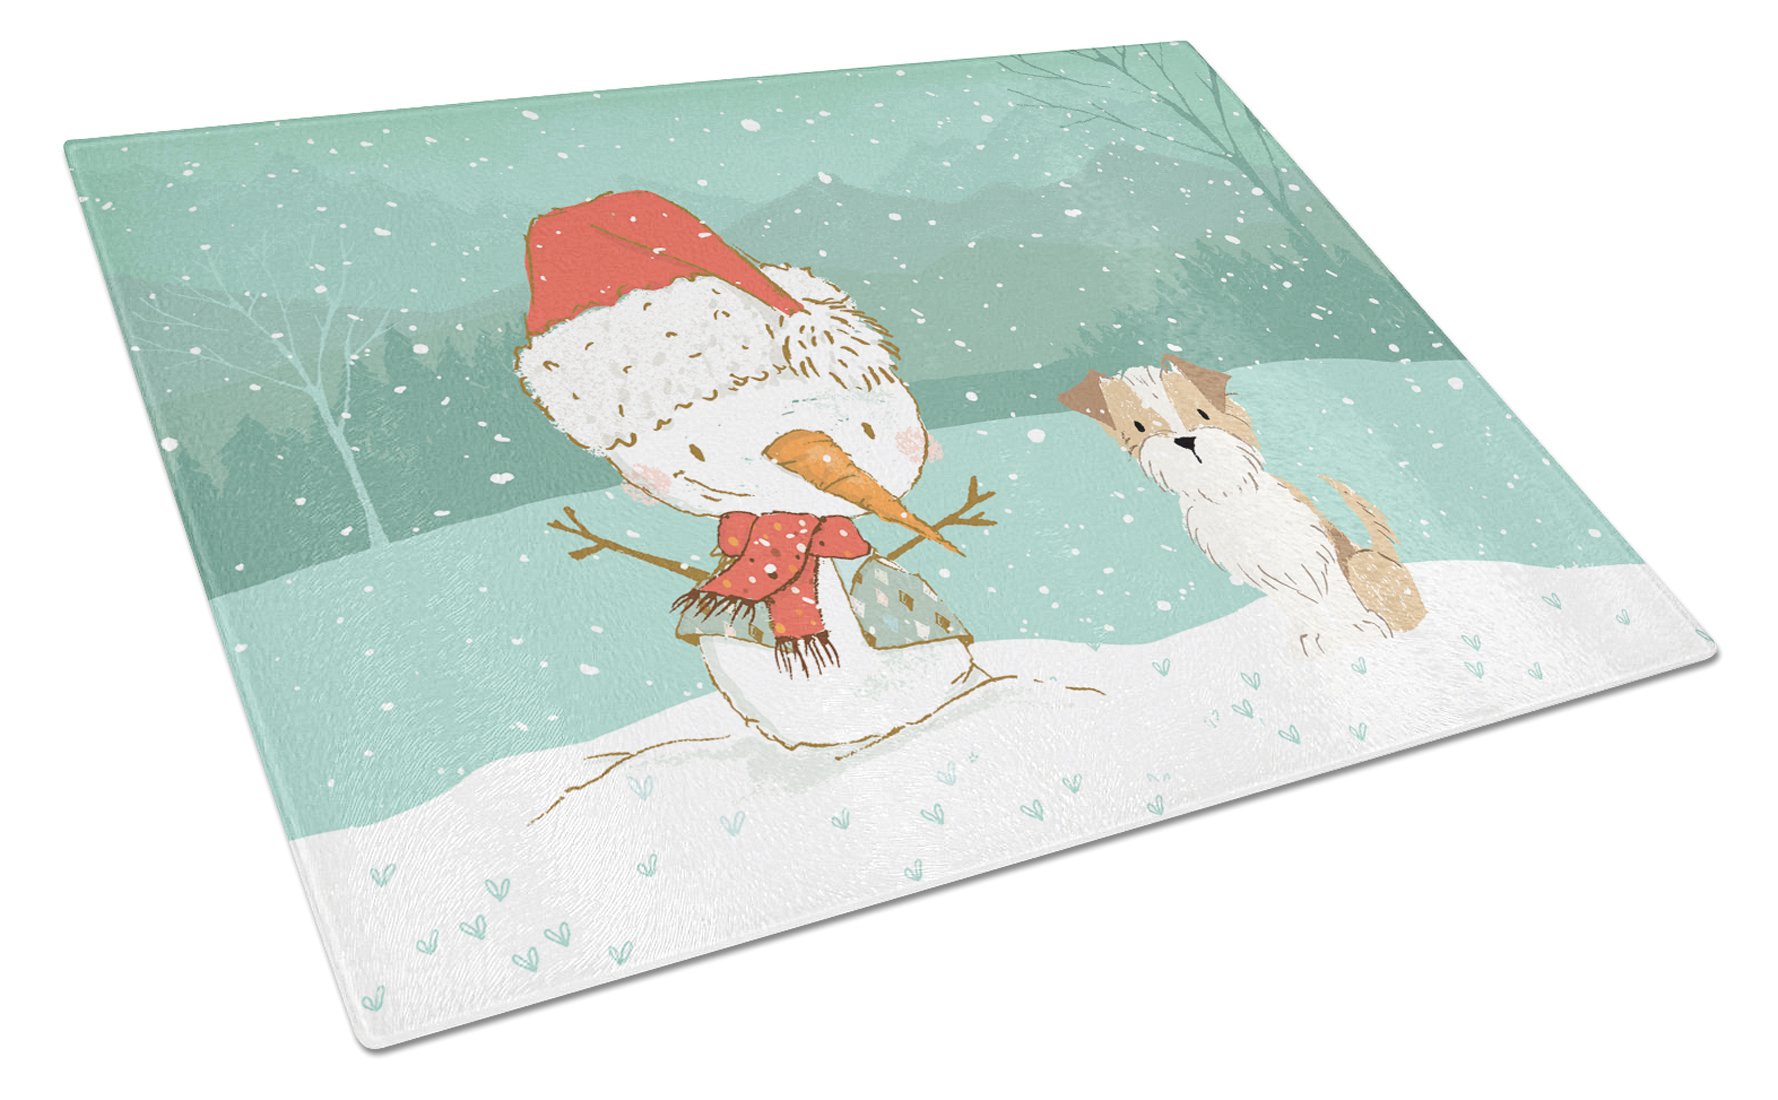 Brown and White Terrier Snowman Christmas Glass Cutting Board Large CK2096LCB by Caroline's Treasures